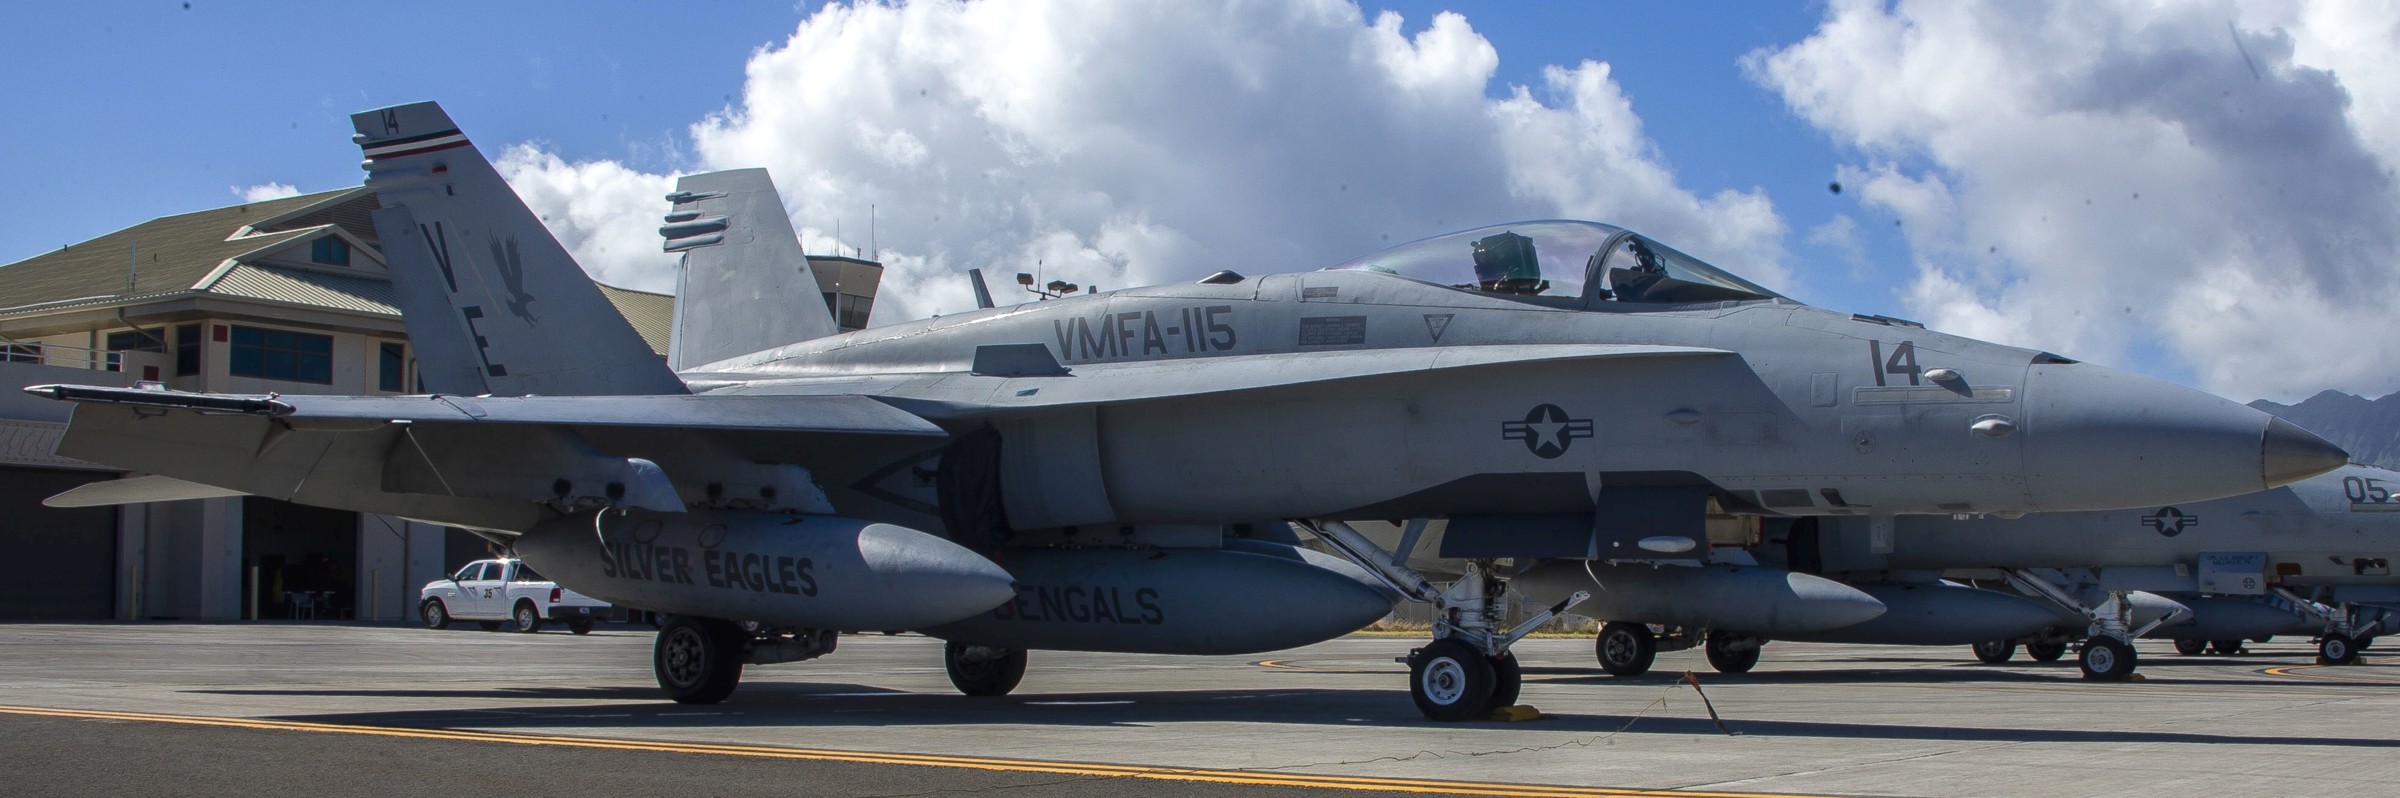 vmfa-115 silver eagles marine fighter attack squadron usmc f/a-18c hornet 188 mcb hawaii kaneohe